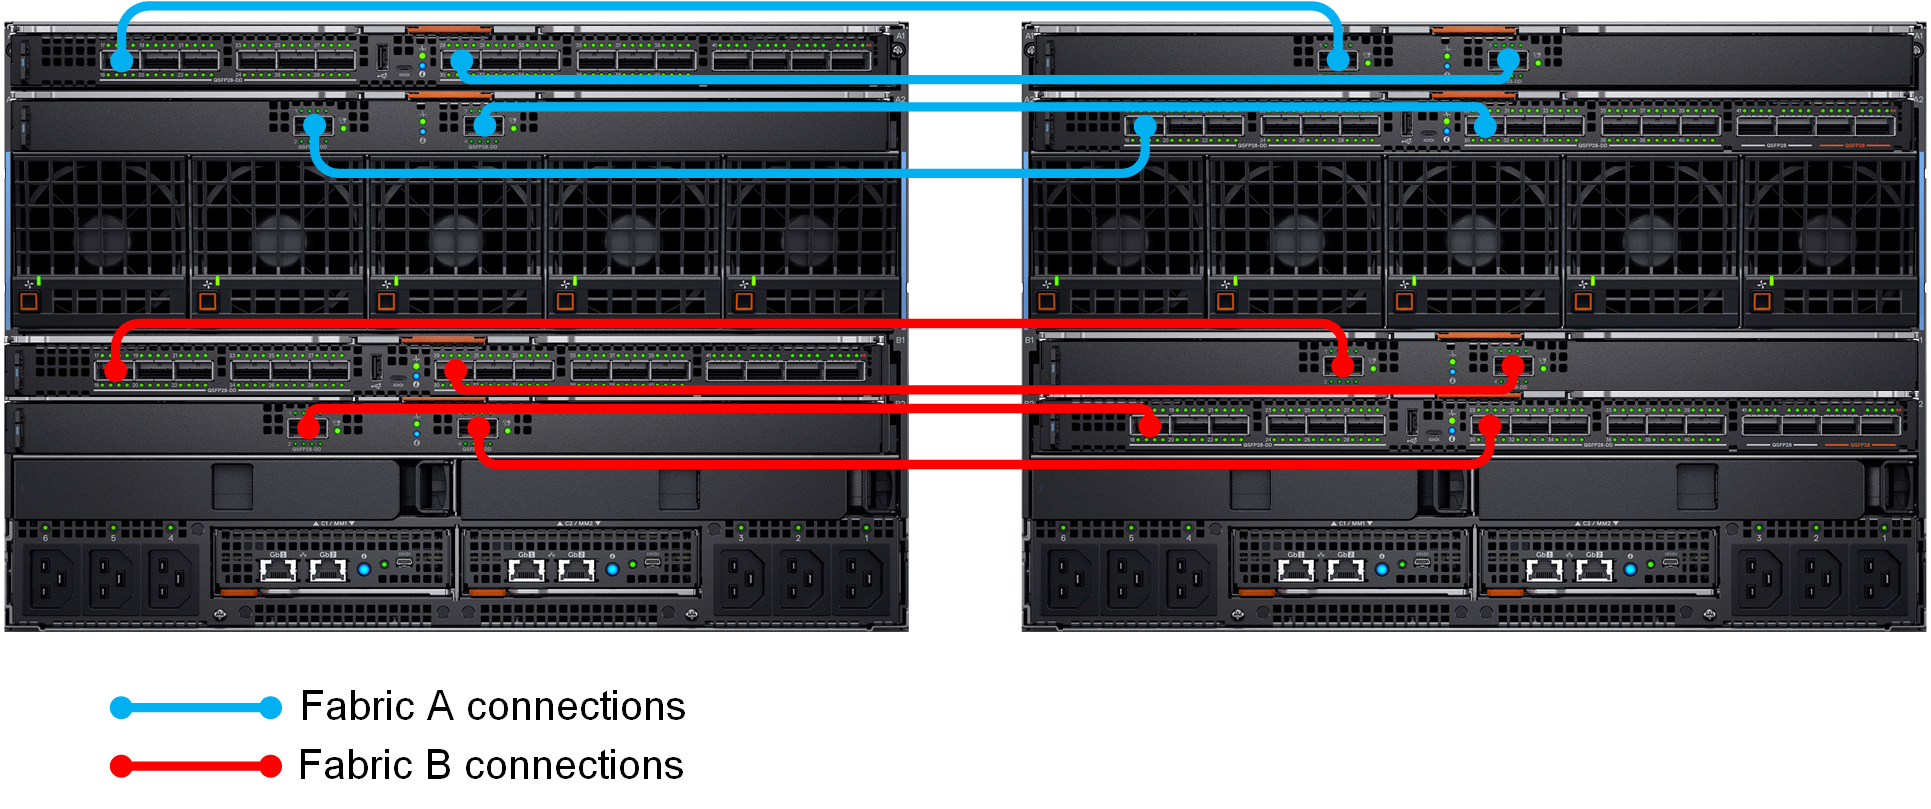 Two-chassis topology with quad-port NICs – dual fabric